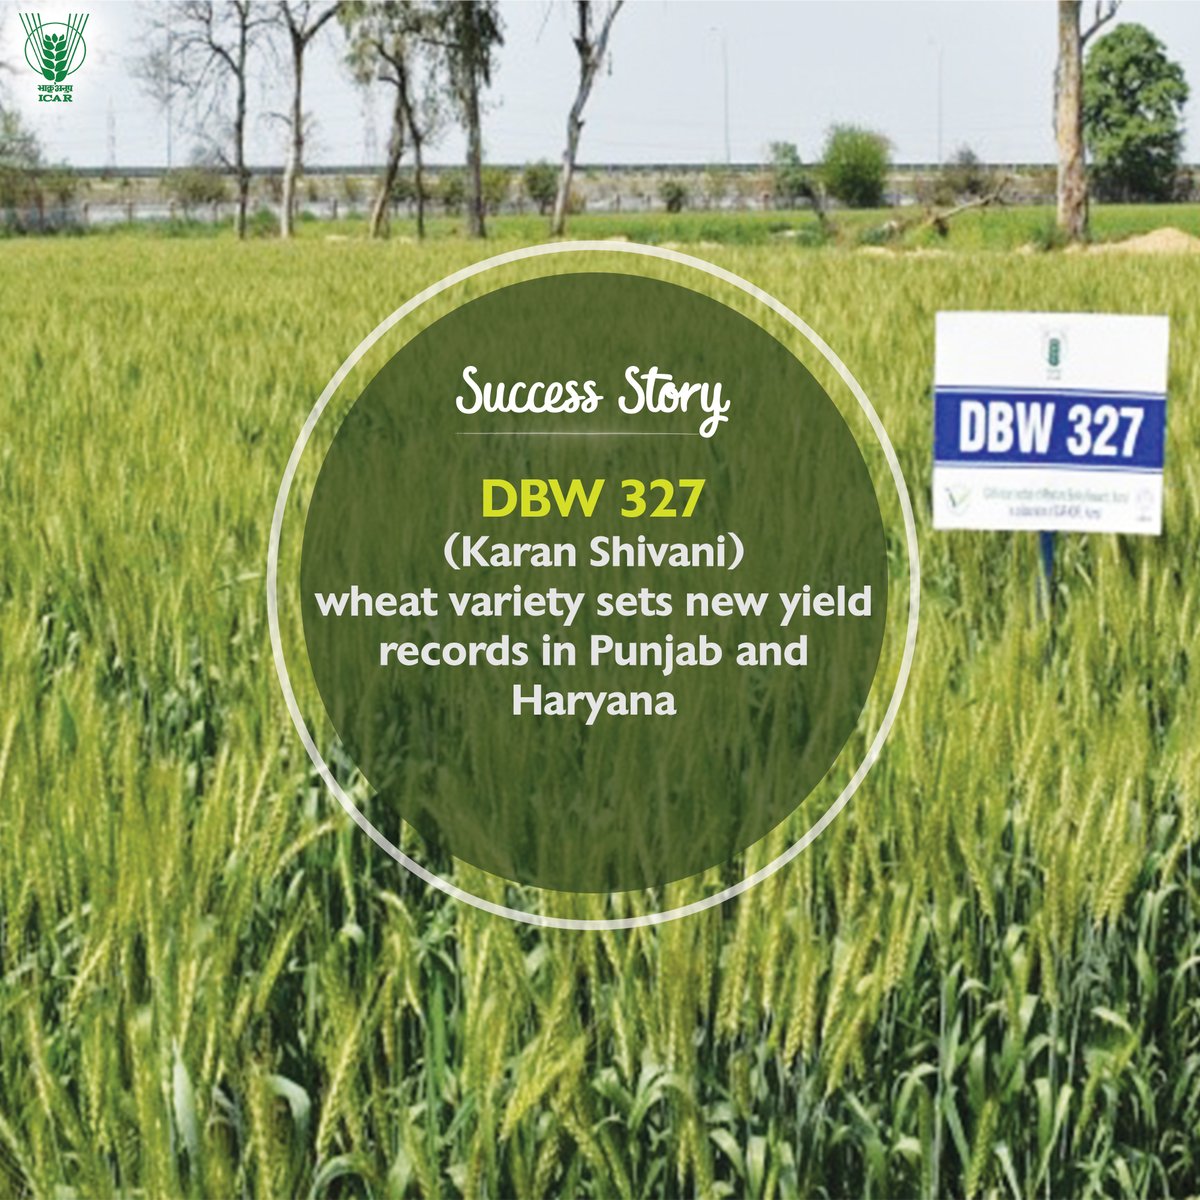 DBW 327 (Karan Shivani) #wheat variety sets new yield records in #Punjab and #Haryana. #ICAR  #Agriculture 
@PMOIndia @mygovindia @PIB_India
@AgriGoI @DDKisanChannel

Read more: icar.org.in/node/20718